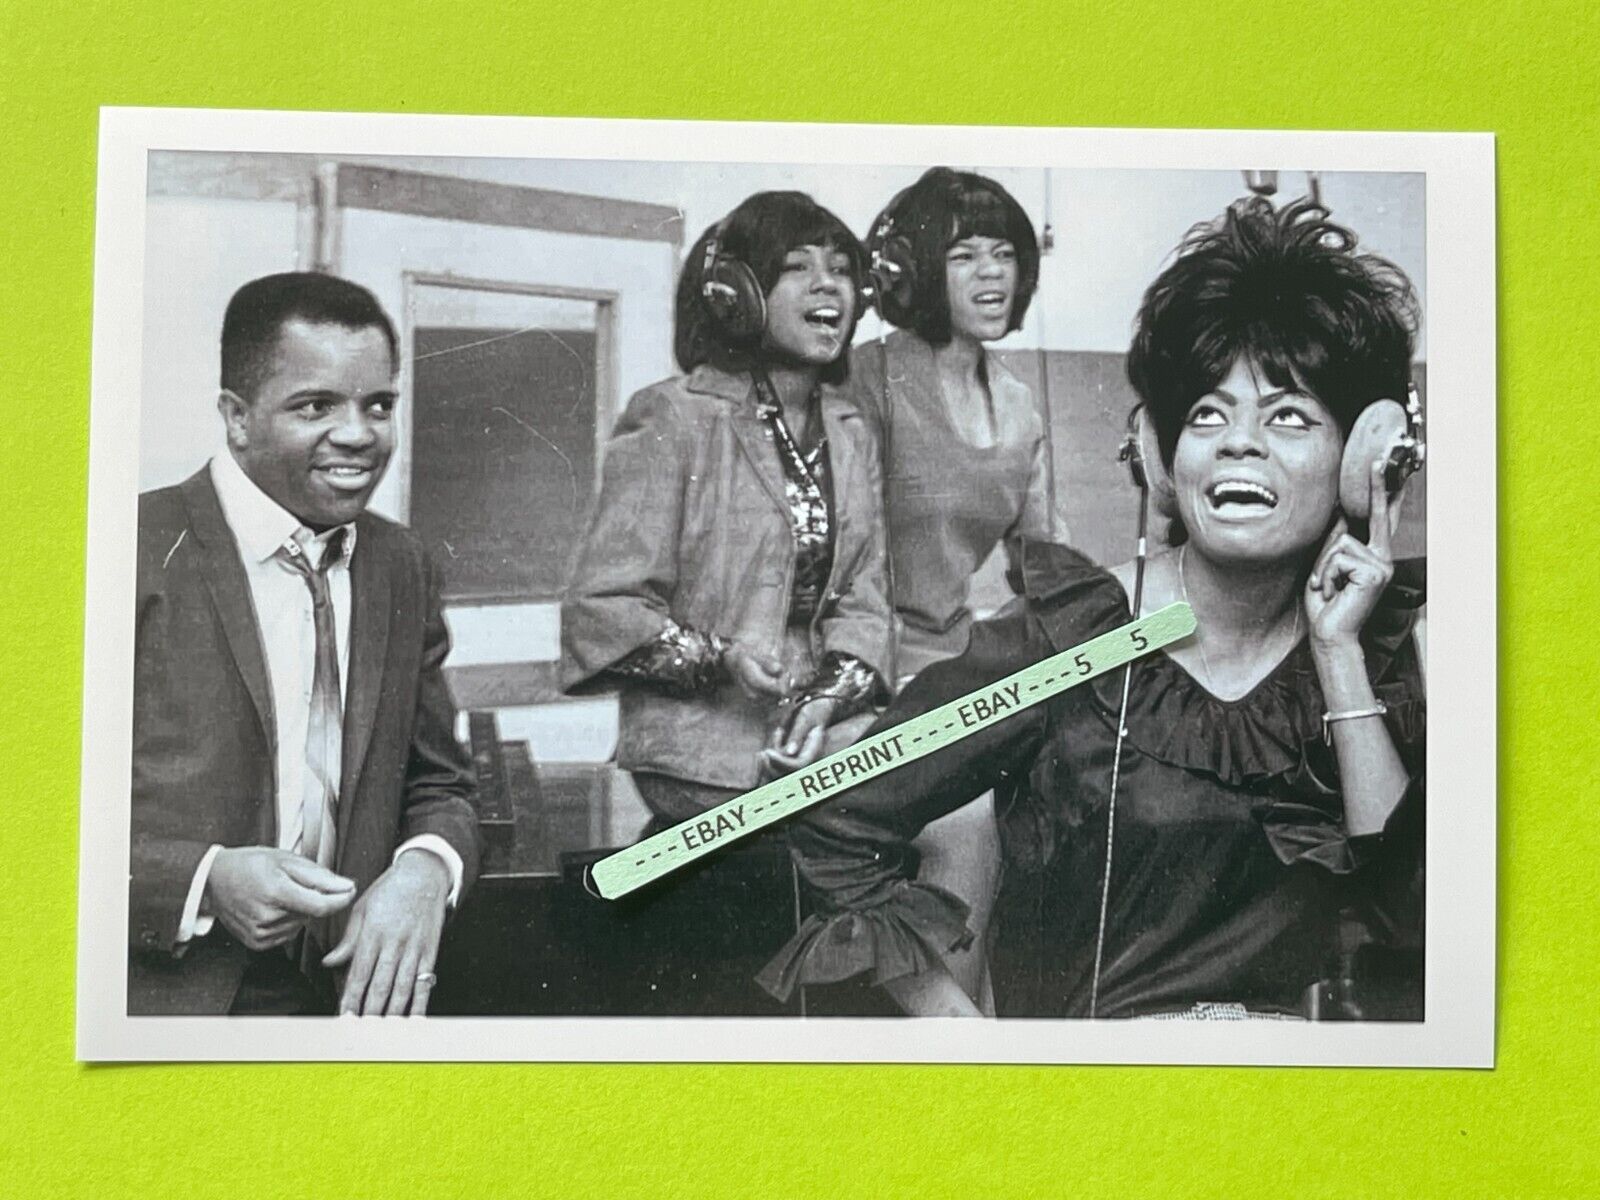 Found Photo of MOTOWN Singer Diana Ross and the Supremes with Barry Gordy